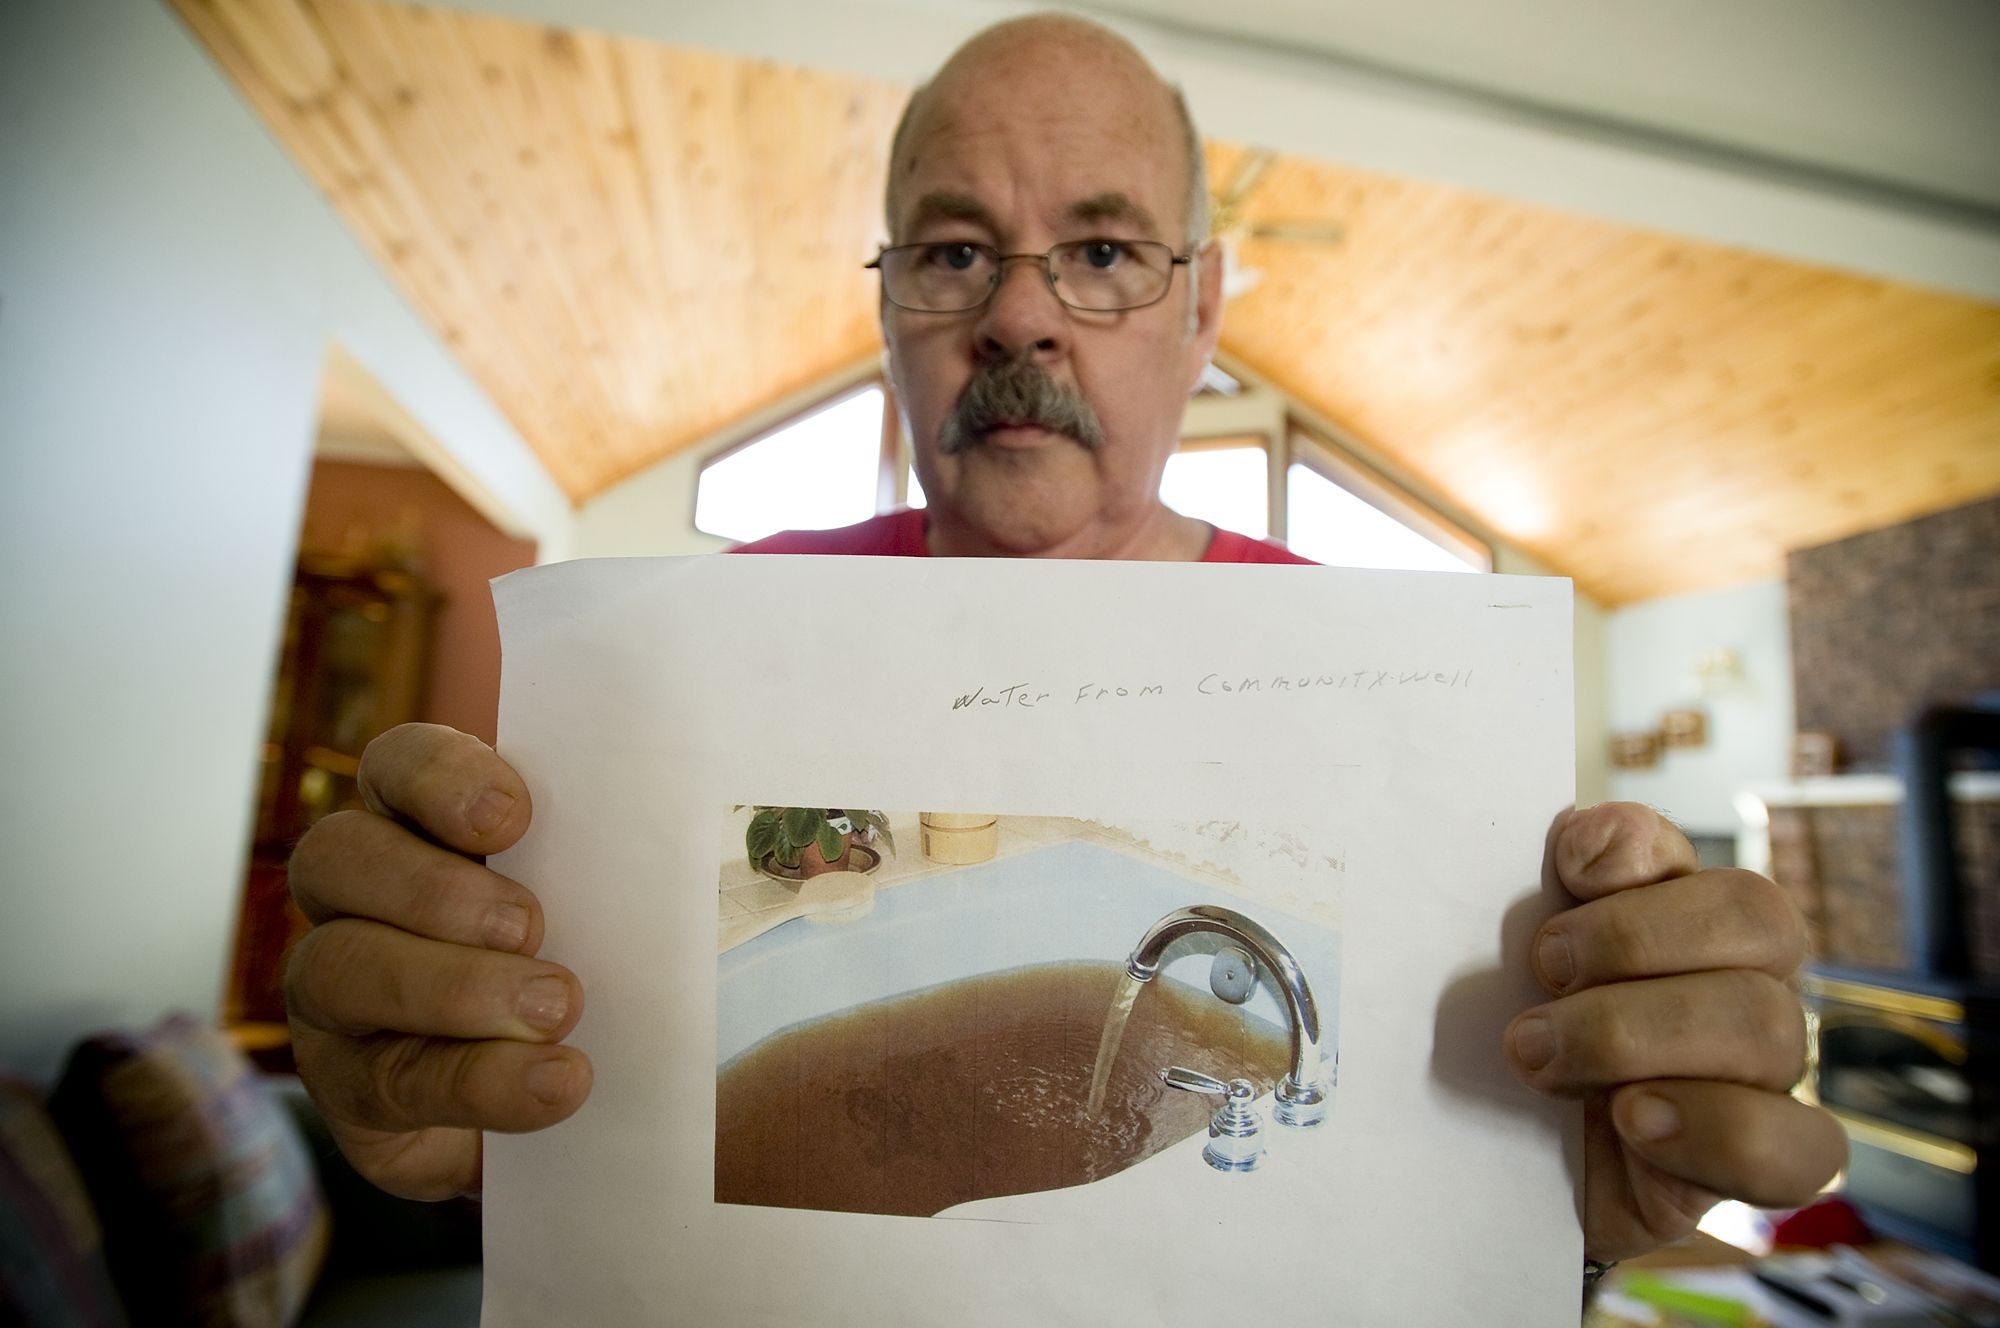 David Rogers showed Clark County commissioners this photo of his bathtub filled with well water as evidence that operation of the Yacolt Mountain Quarry has ruined his well, but commissioners say there's no proof the quarry is to blame.